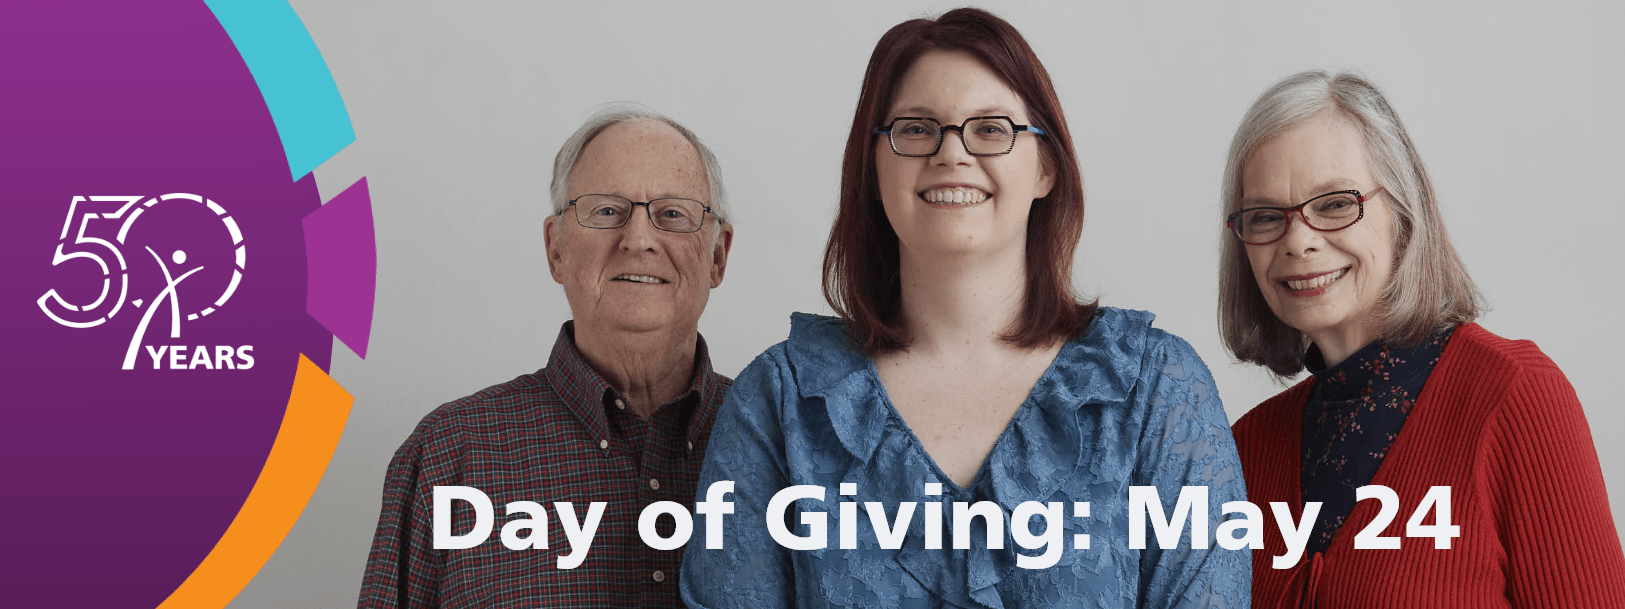 From one to many: Join the ABTA for its inaugural Day of Giving on May 24.